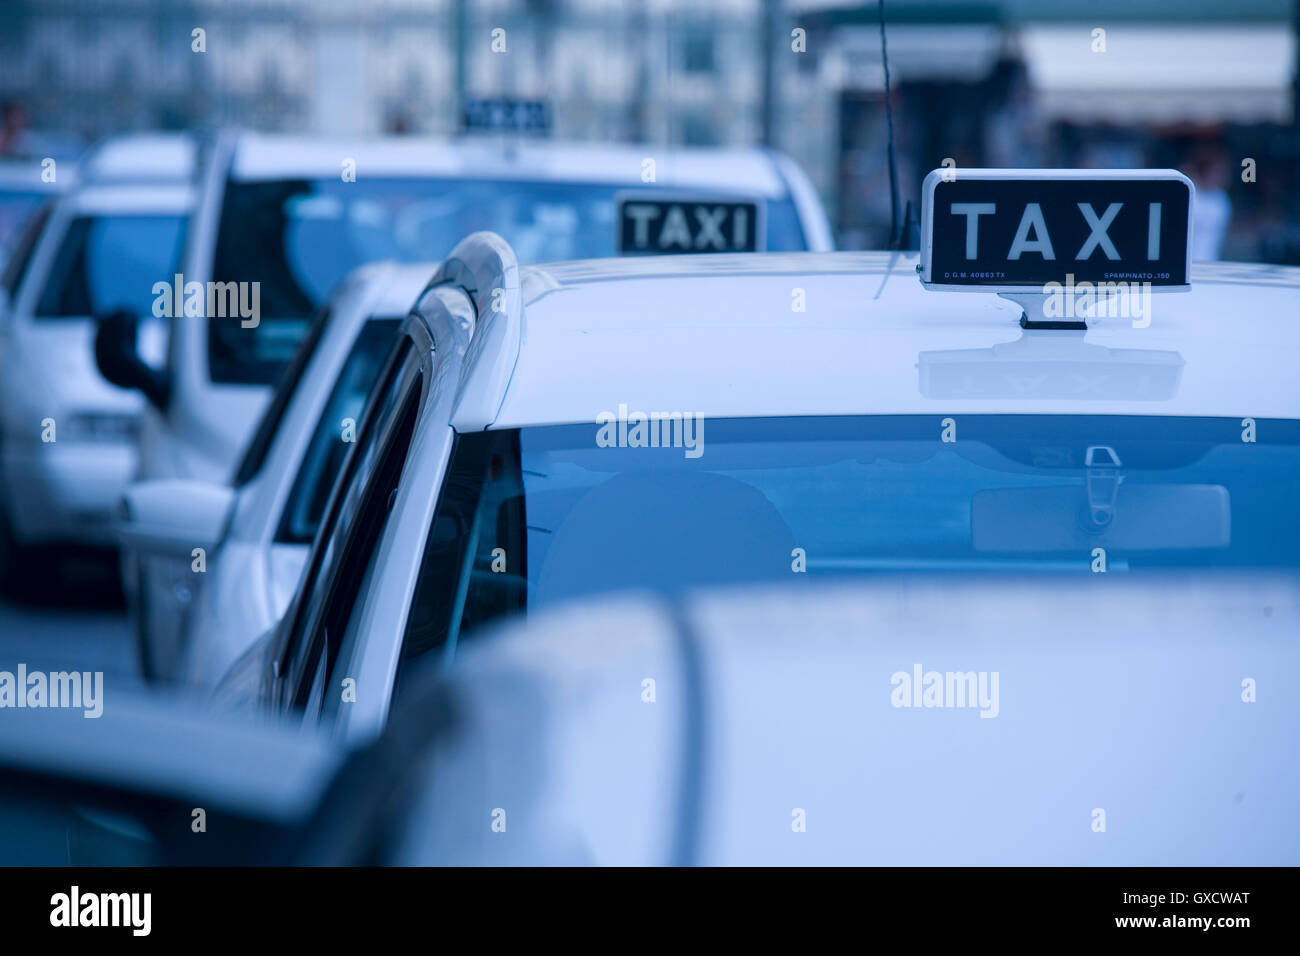 Taxis in queue, Piedmont, Turin, Italy Stock Photo